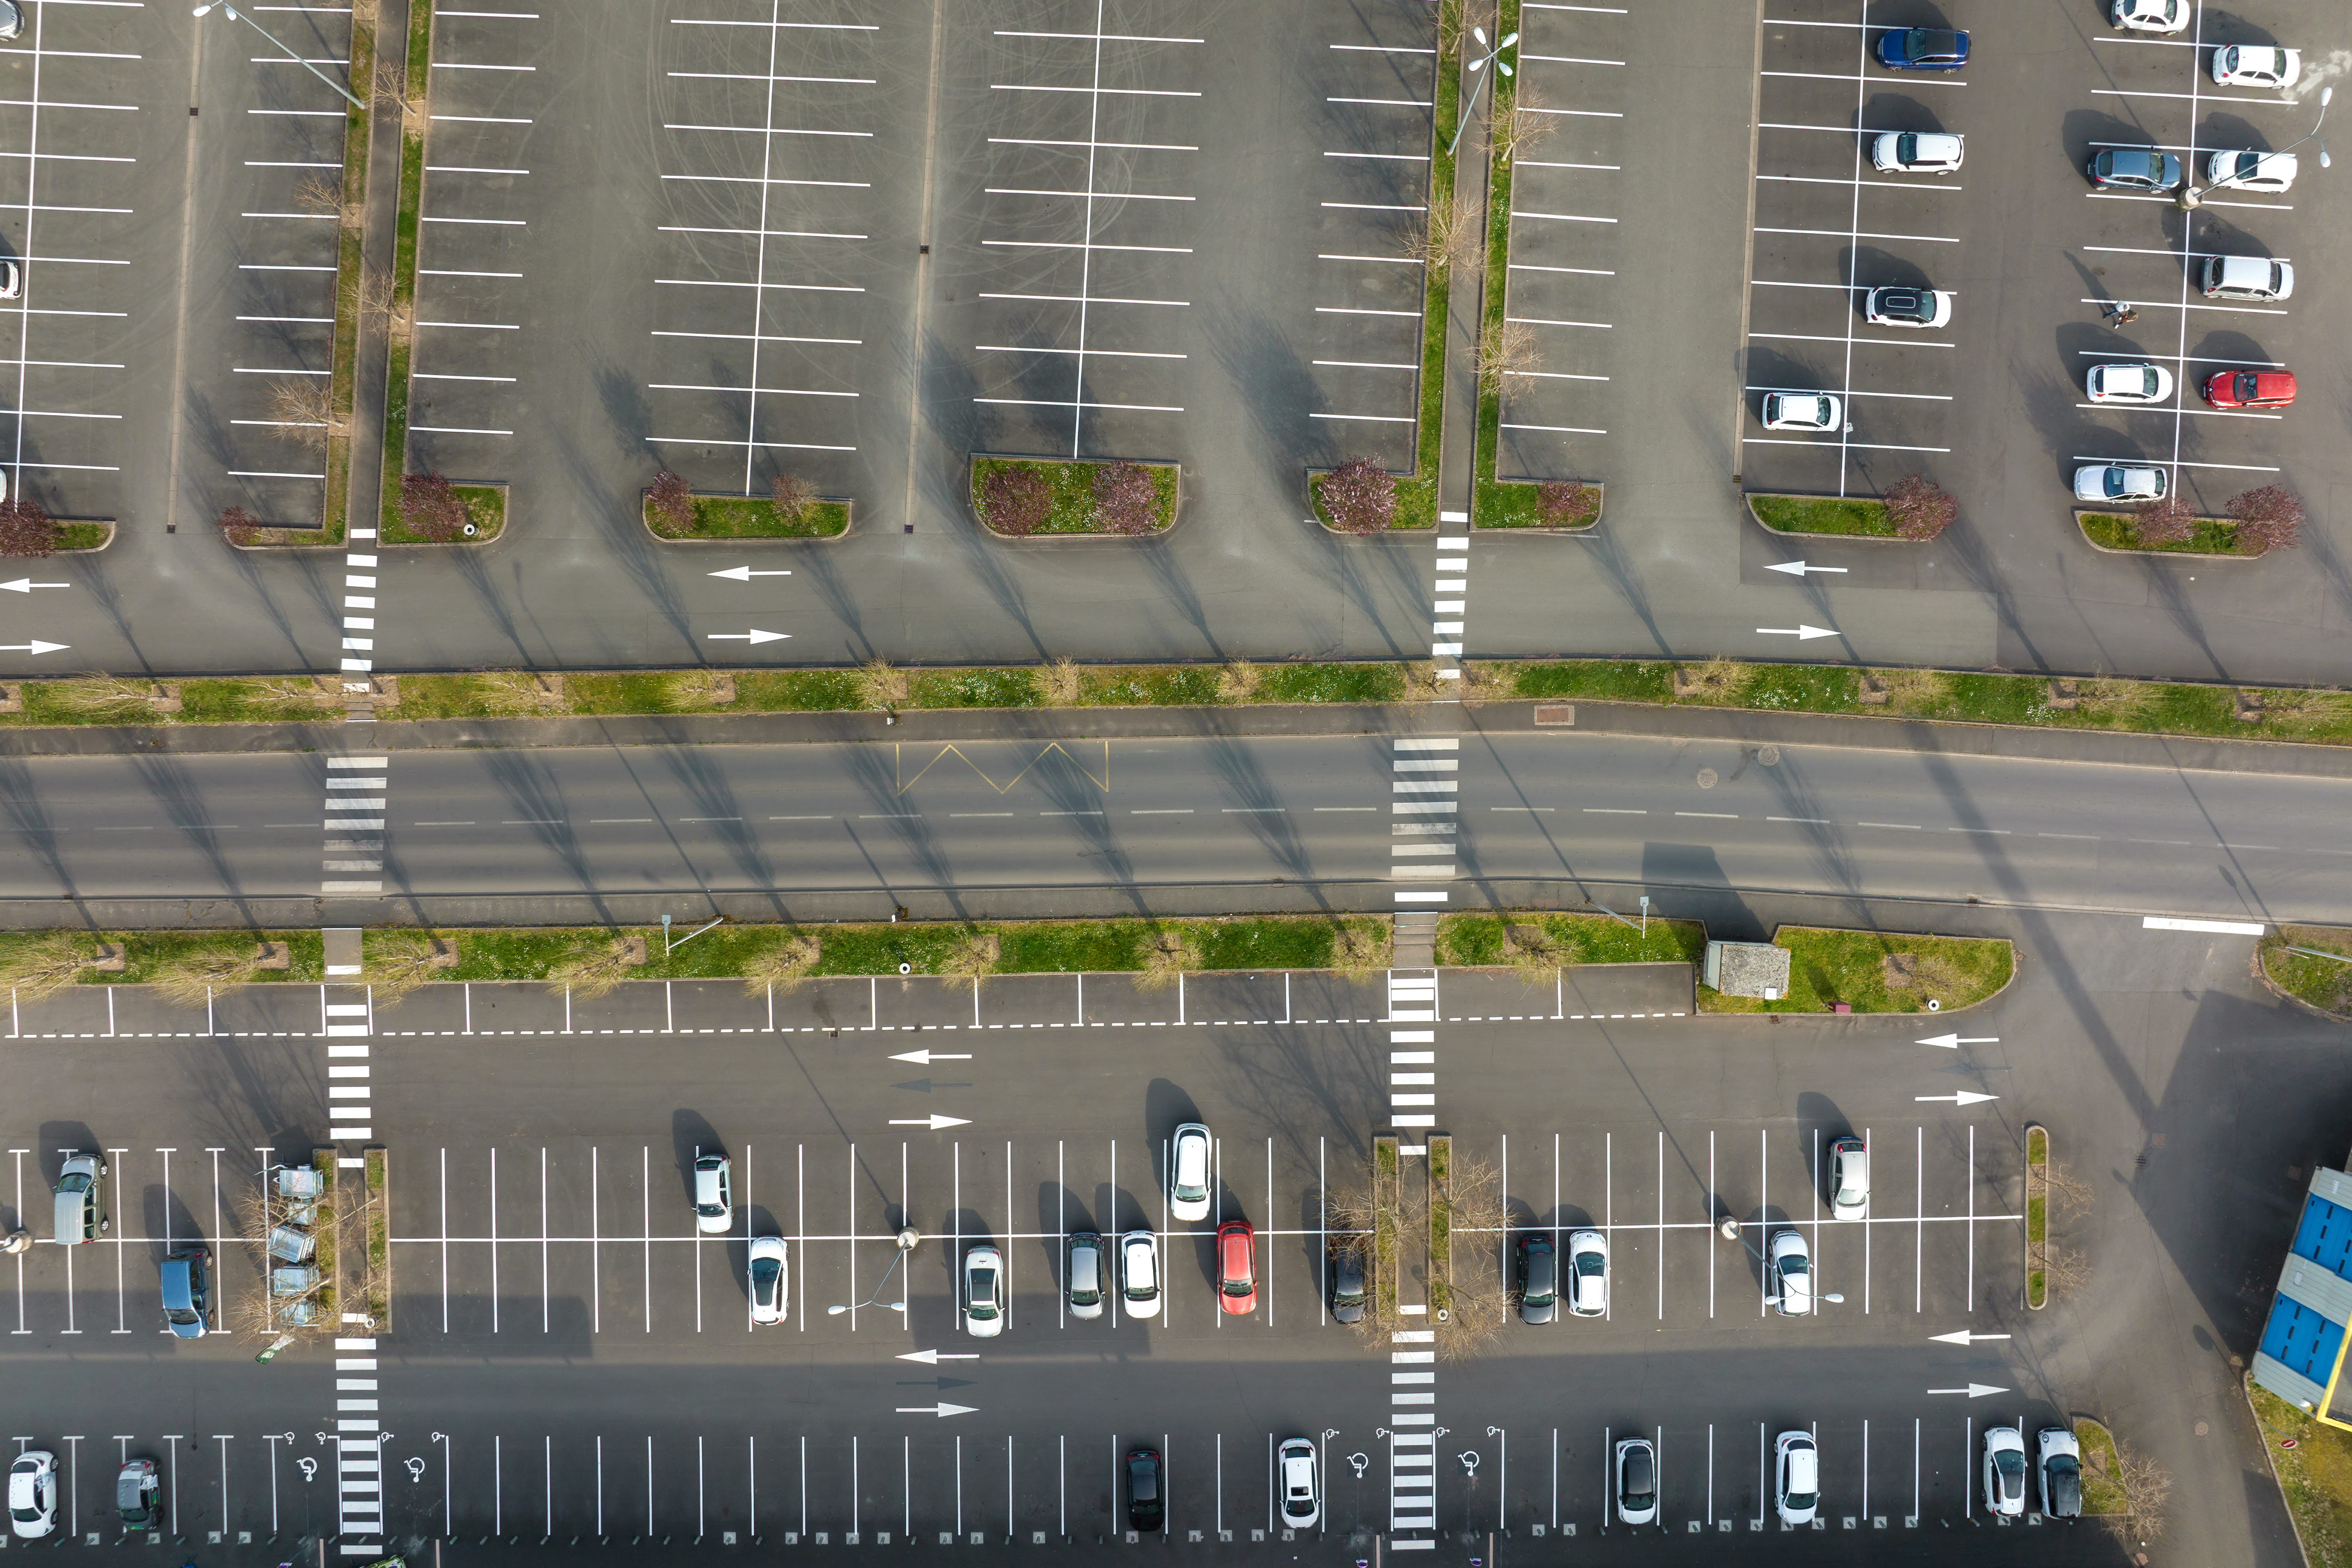 Aerial view of many colorful cars parked on parking lot with lines and markings for parking places